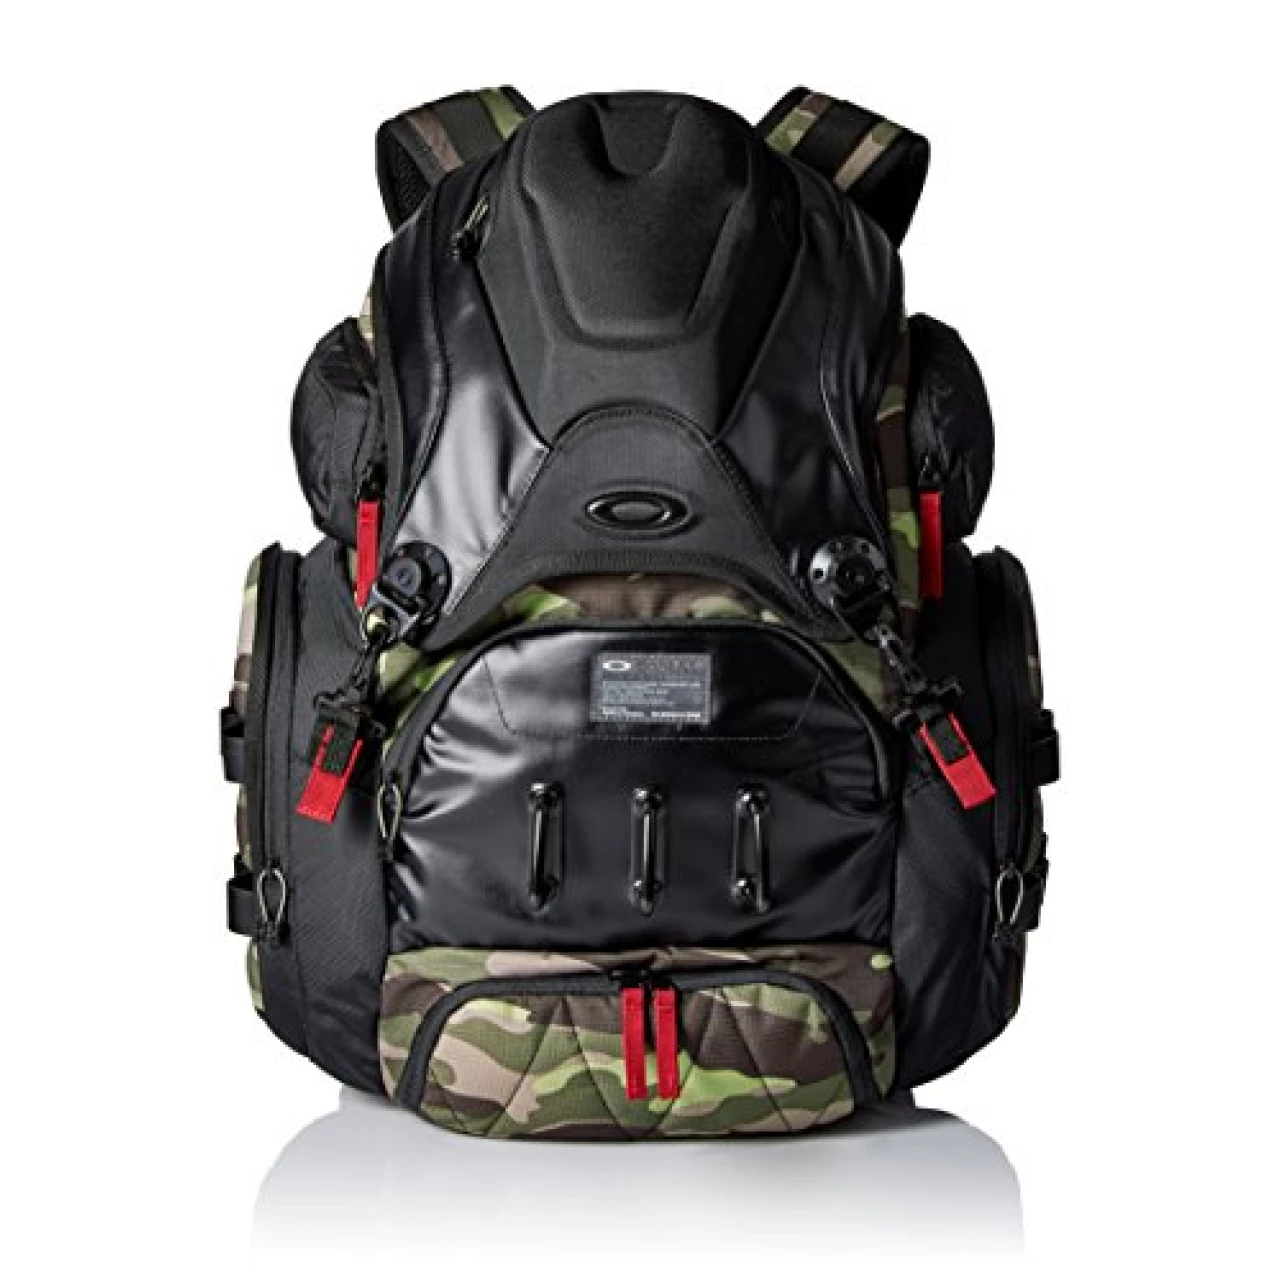 Oakley Men&rsquo;s Big Kitchen Sink Backpack, Herb, One Size